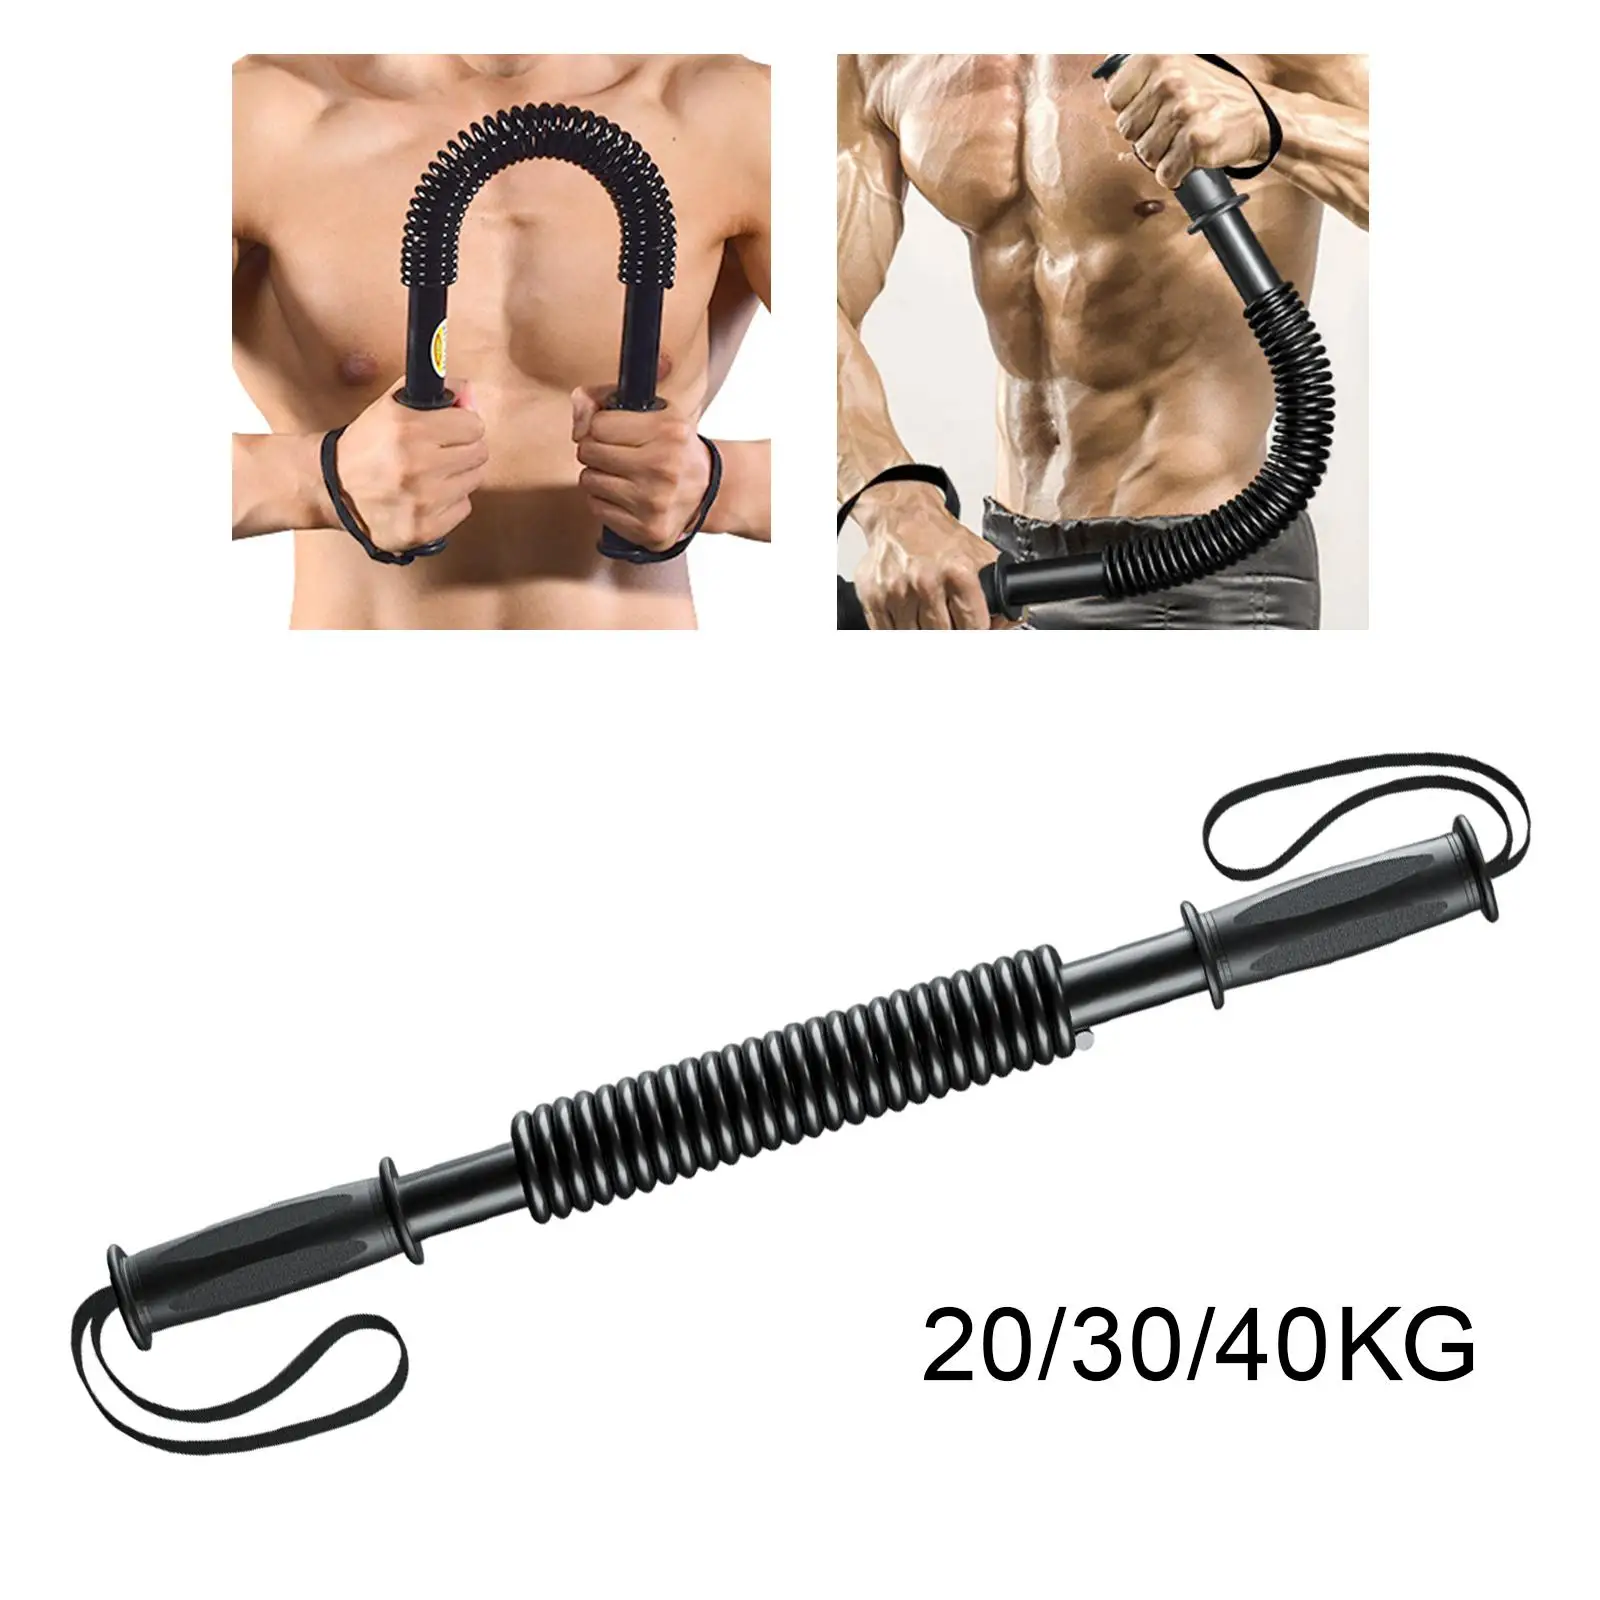 Chest Expander Spring Power Twister Bar Upper Body Exercise Strength Training for Trainer Home Gym Shoulder Muscle Pulling Bicep